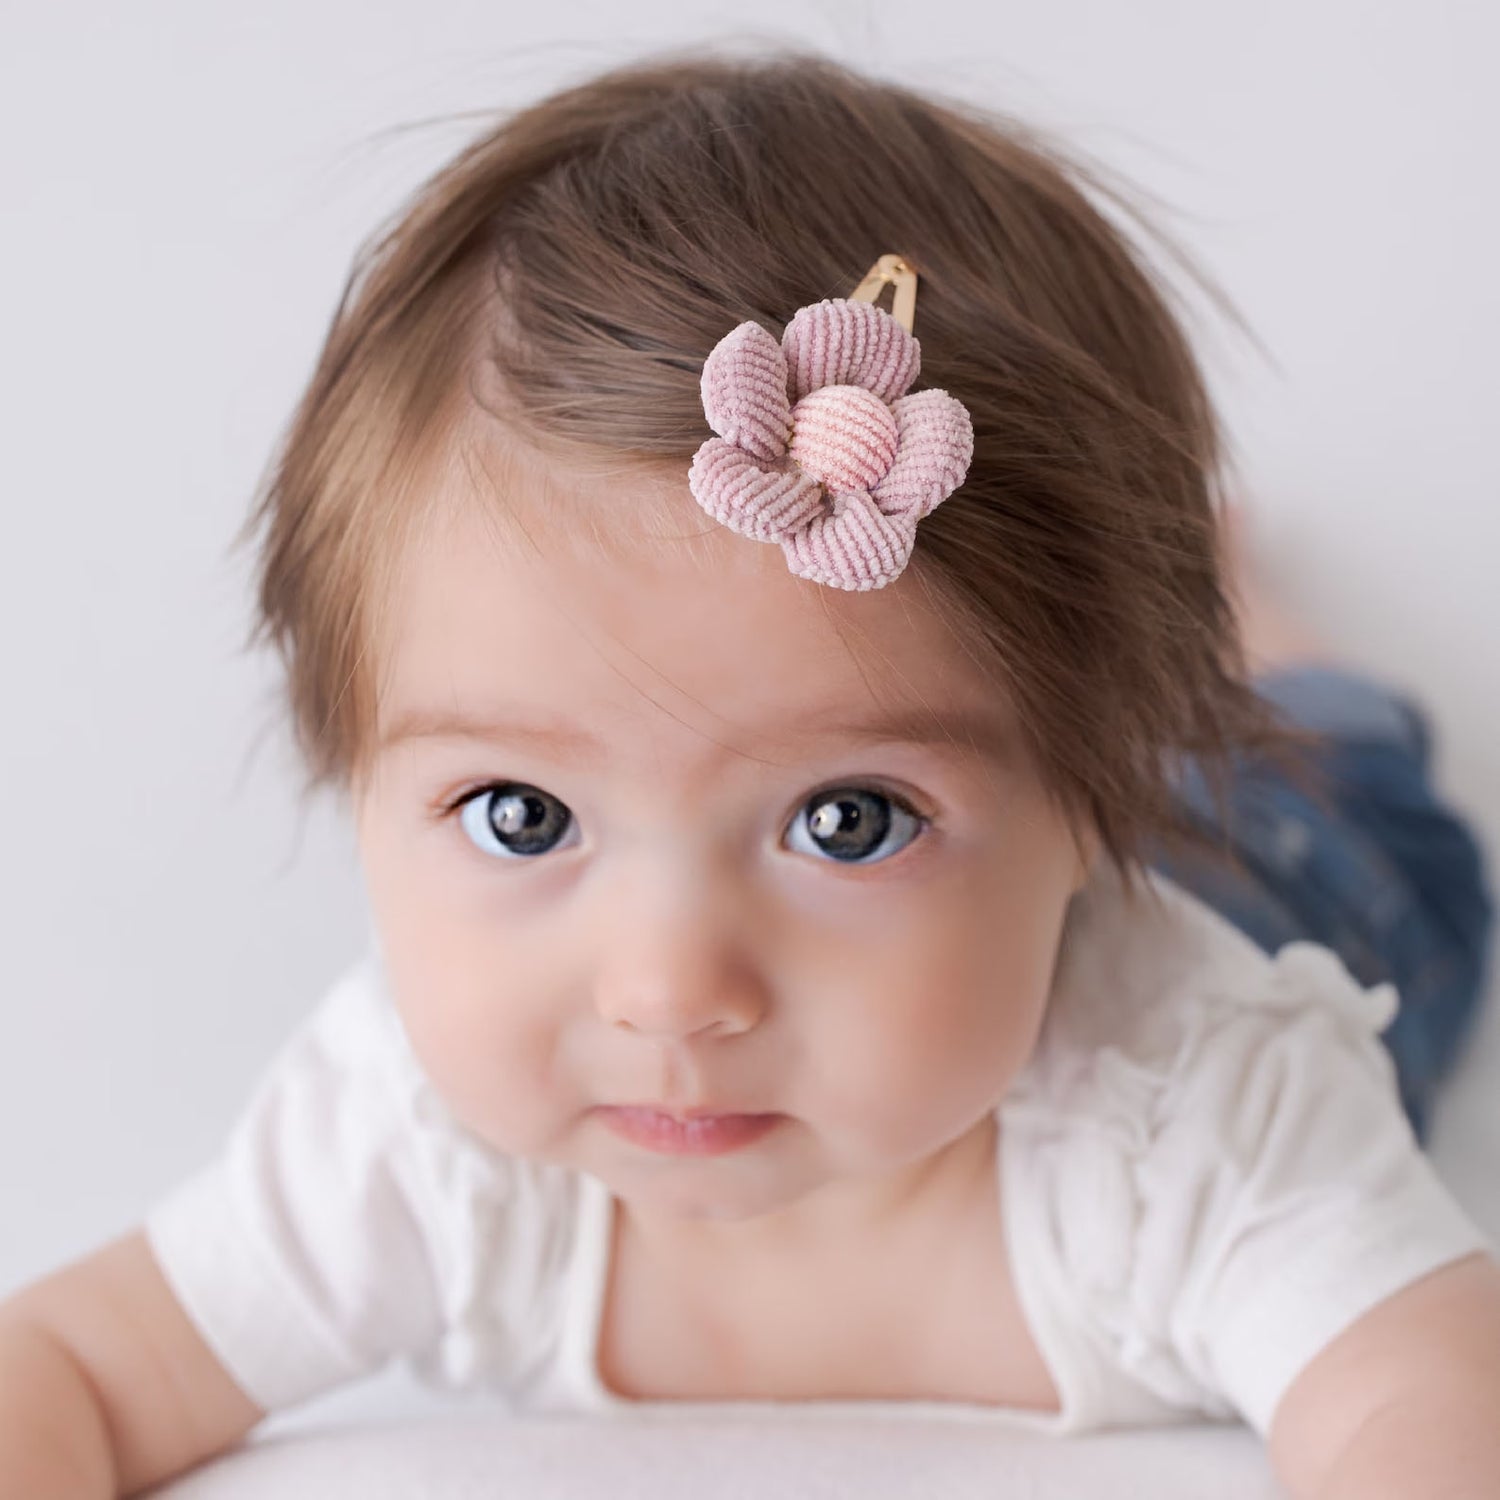 Bitty Boe - Fashionable accessories for your little ones